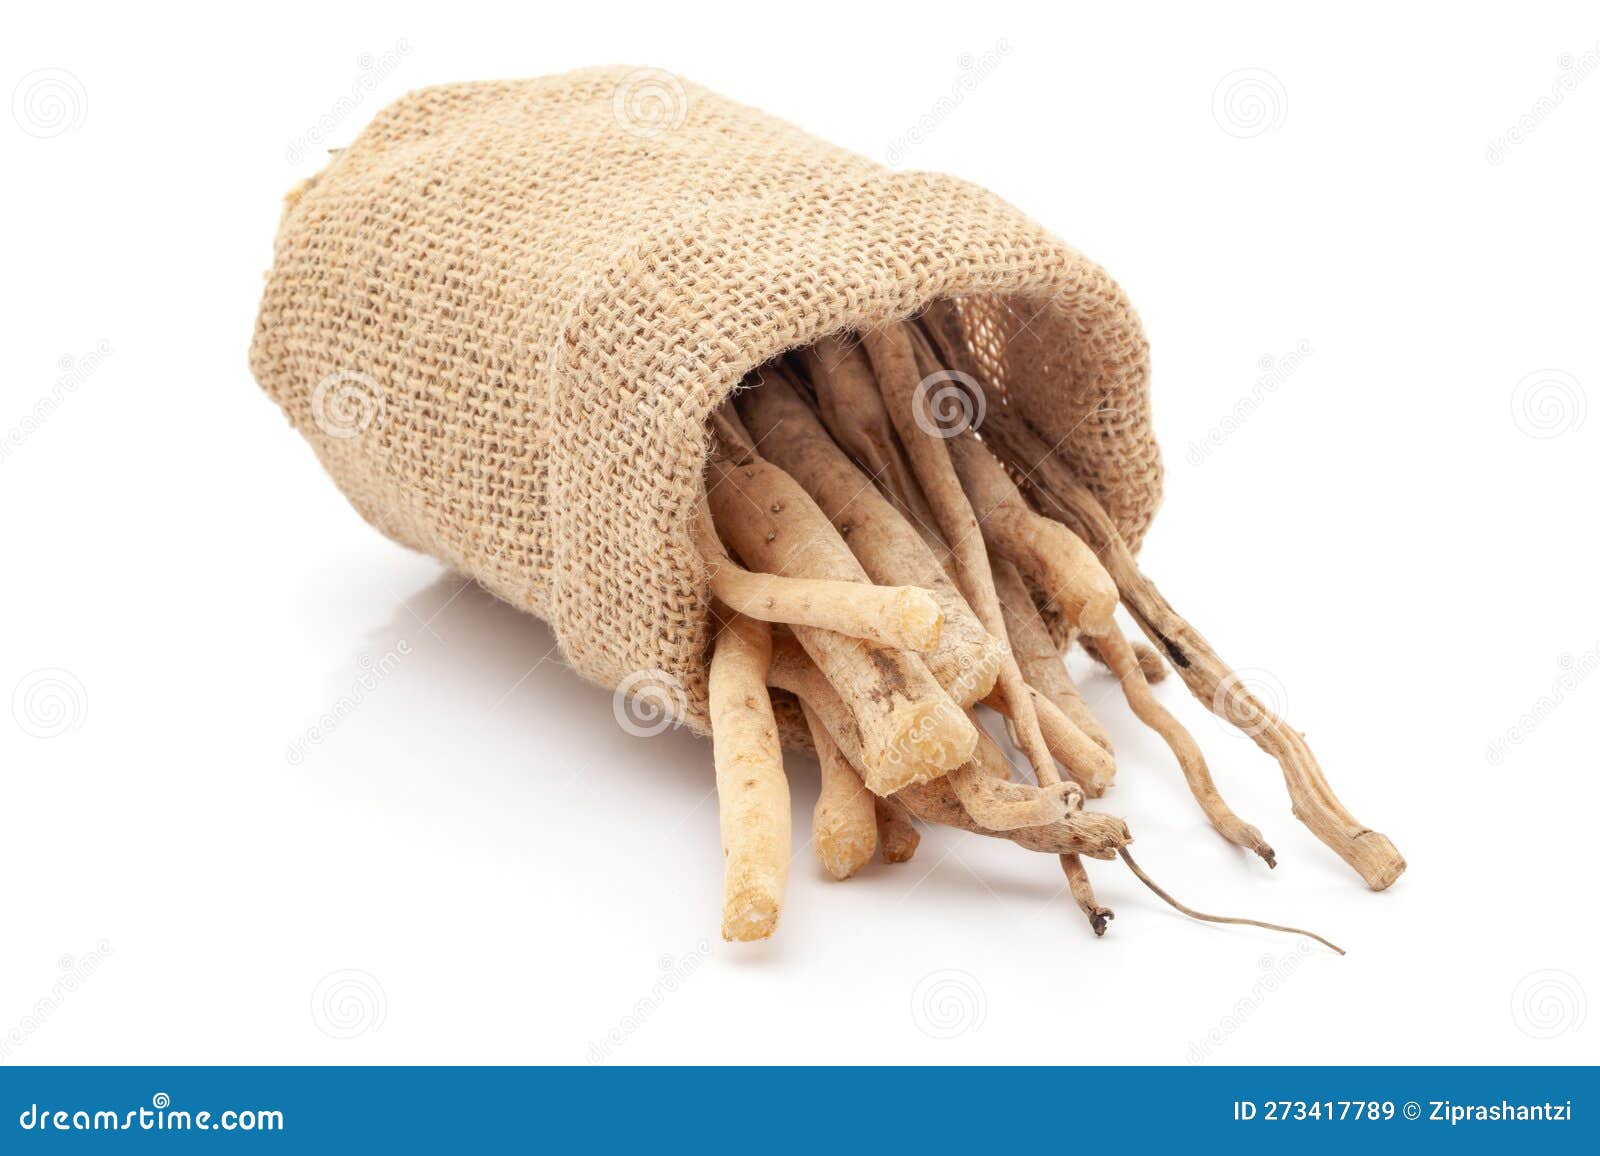 close-up of shatavari roots, in laying jute bag over white background.